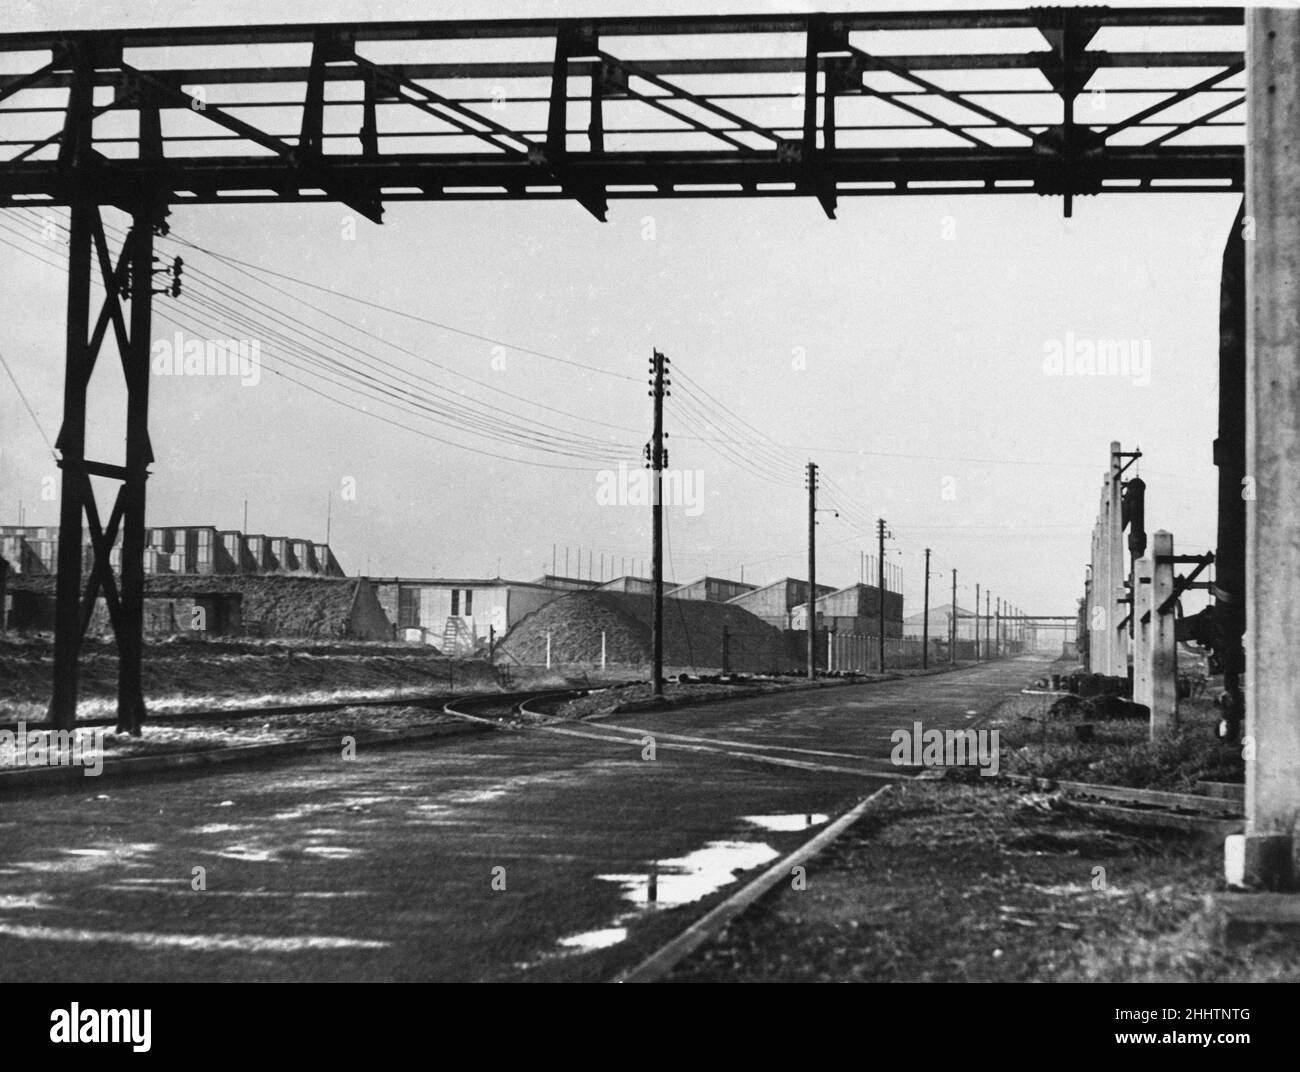 Kirkby, a town in the Metropolitan Borough of Knowsley, Merseyside, England. Our picture shows, a section of the vast Liverpool Corporation Trading Estate in Kirkby, with its roads and railway lines running to all the factories, 6th January 1947. Stock Photo